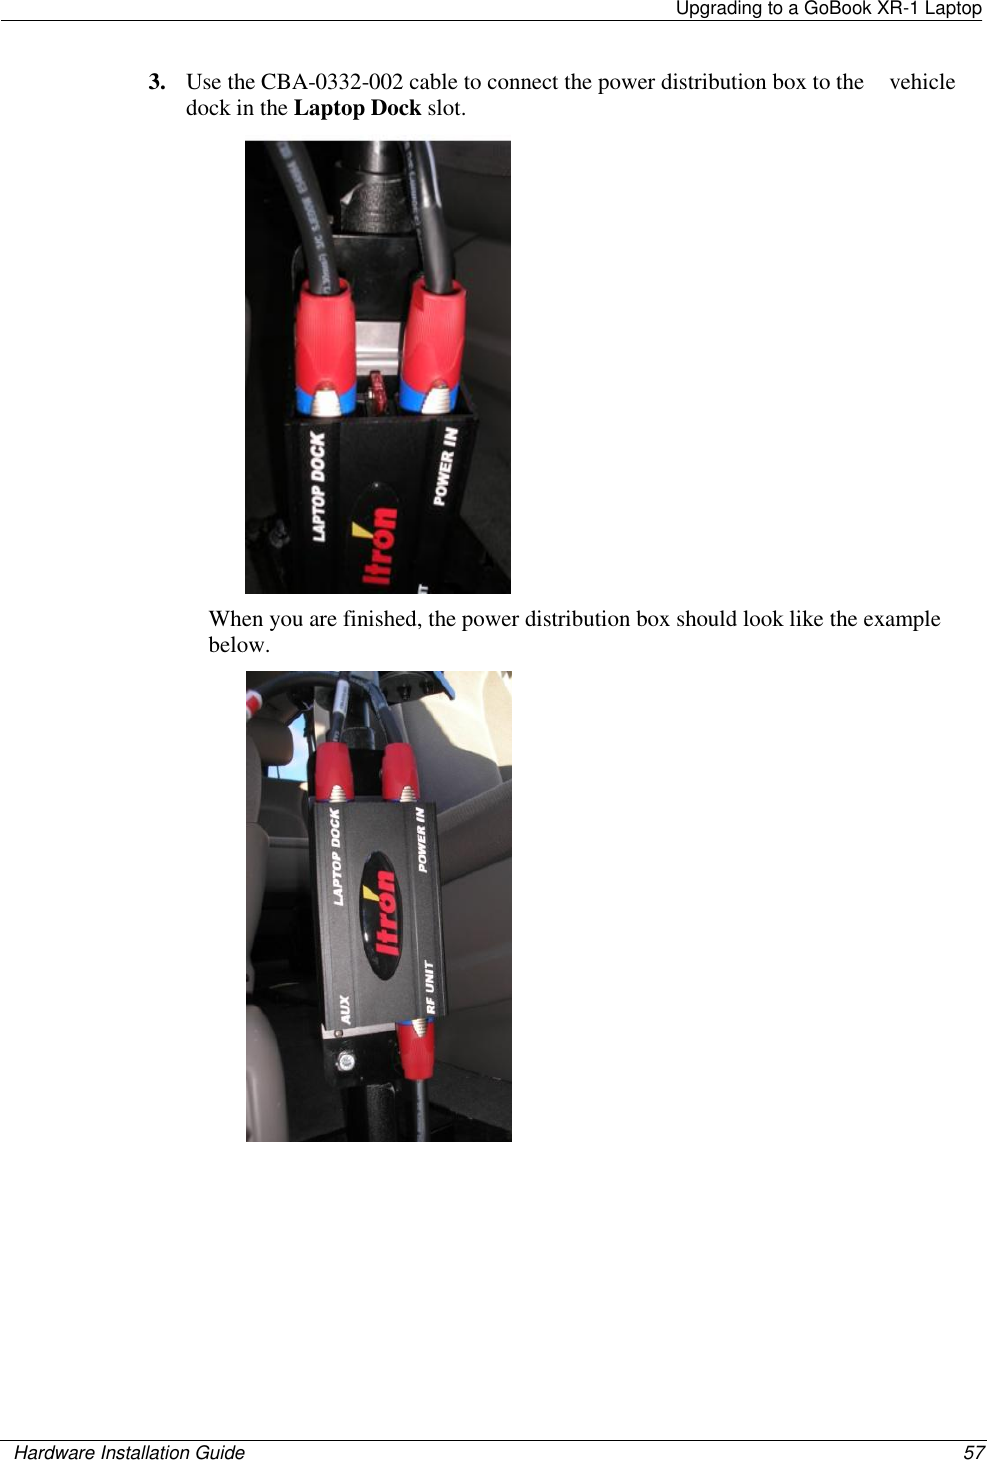   Upgrading to a GoBook XR-1 Laptop    Hardware Installation Guide  57  3. Use the CBA-0332-002 cable to connect the power distribution box to the    vehicle dock in the Laptop Dock slot.  When you are finished, the power distribution box should look like the example below.   